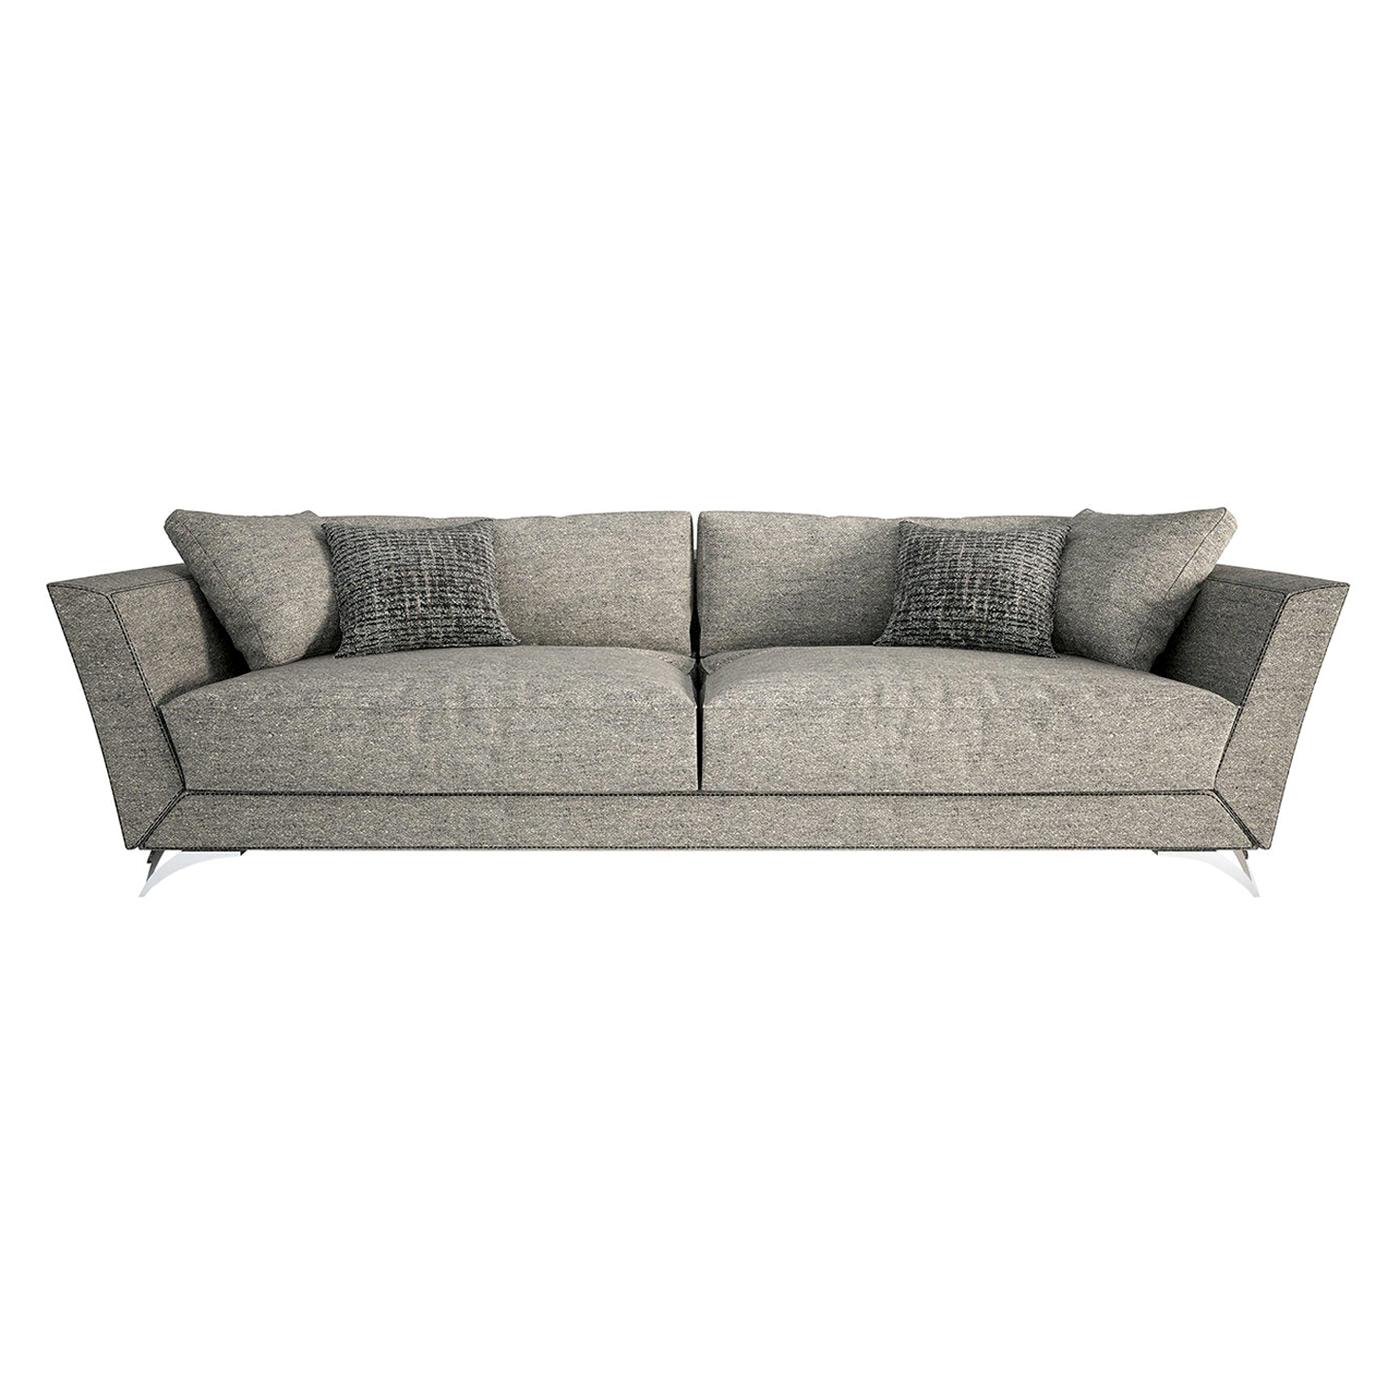 Eliot Sofa by Meroni For Sale